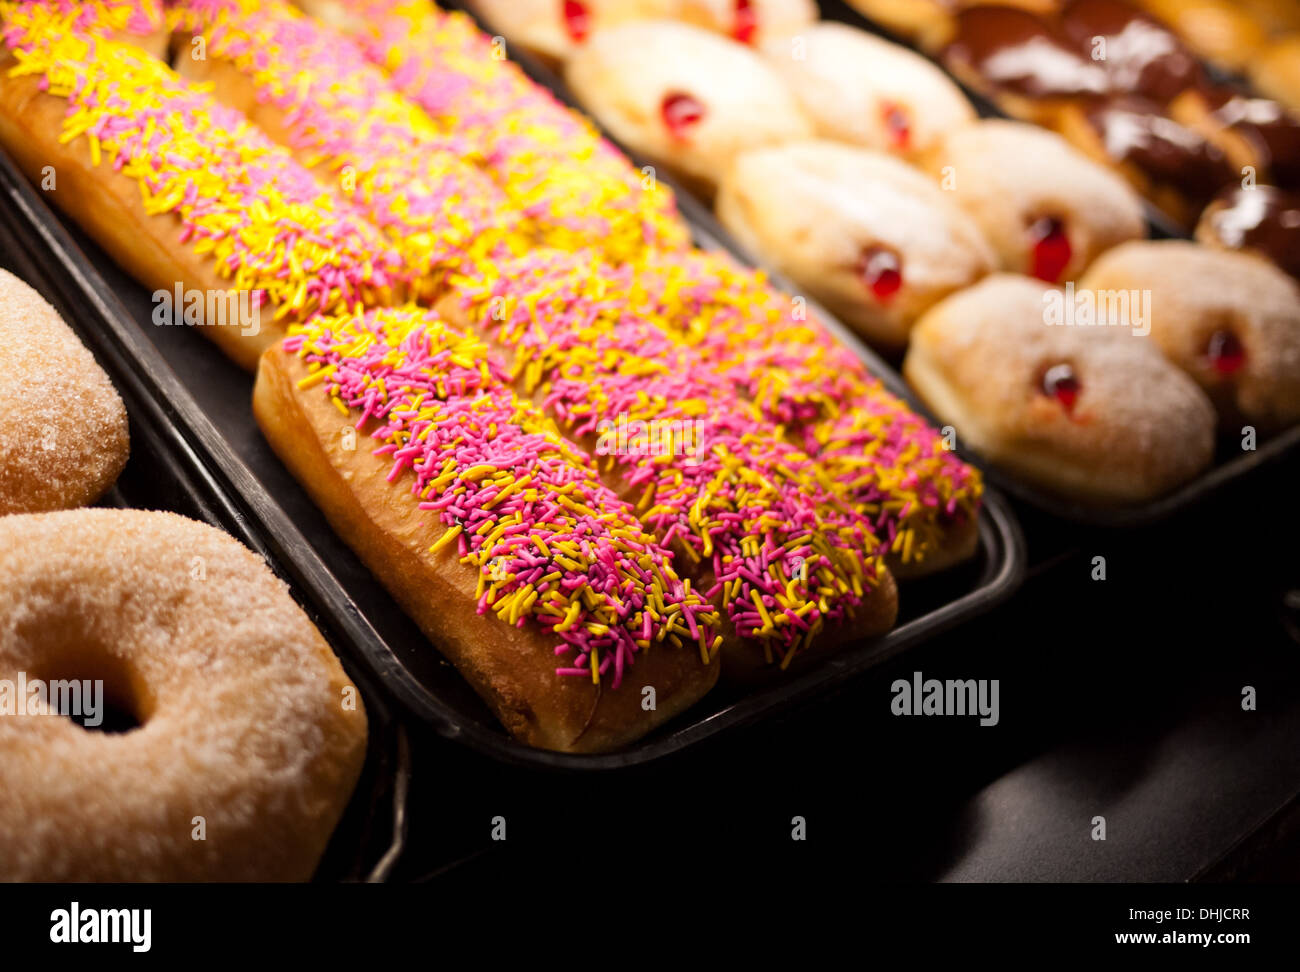 Sprinkle donuts, sugar donuts, and powdered jelly filled donuts in a bakery window. Stock Photo